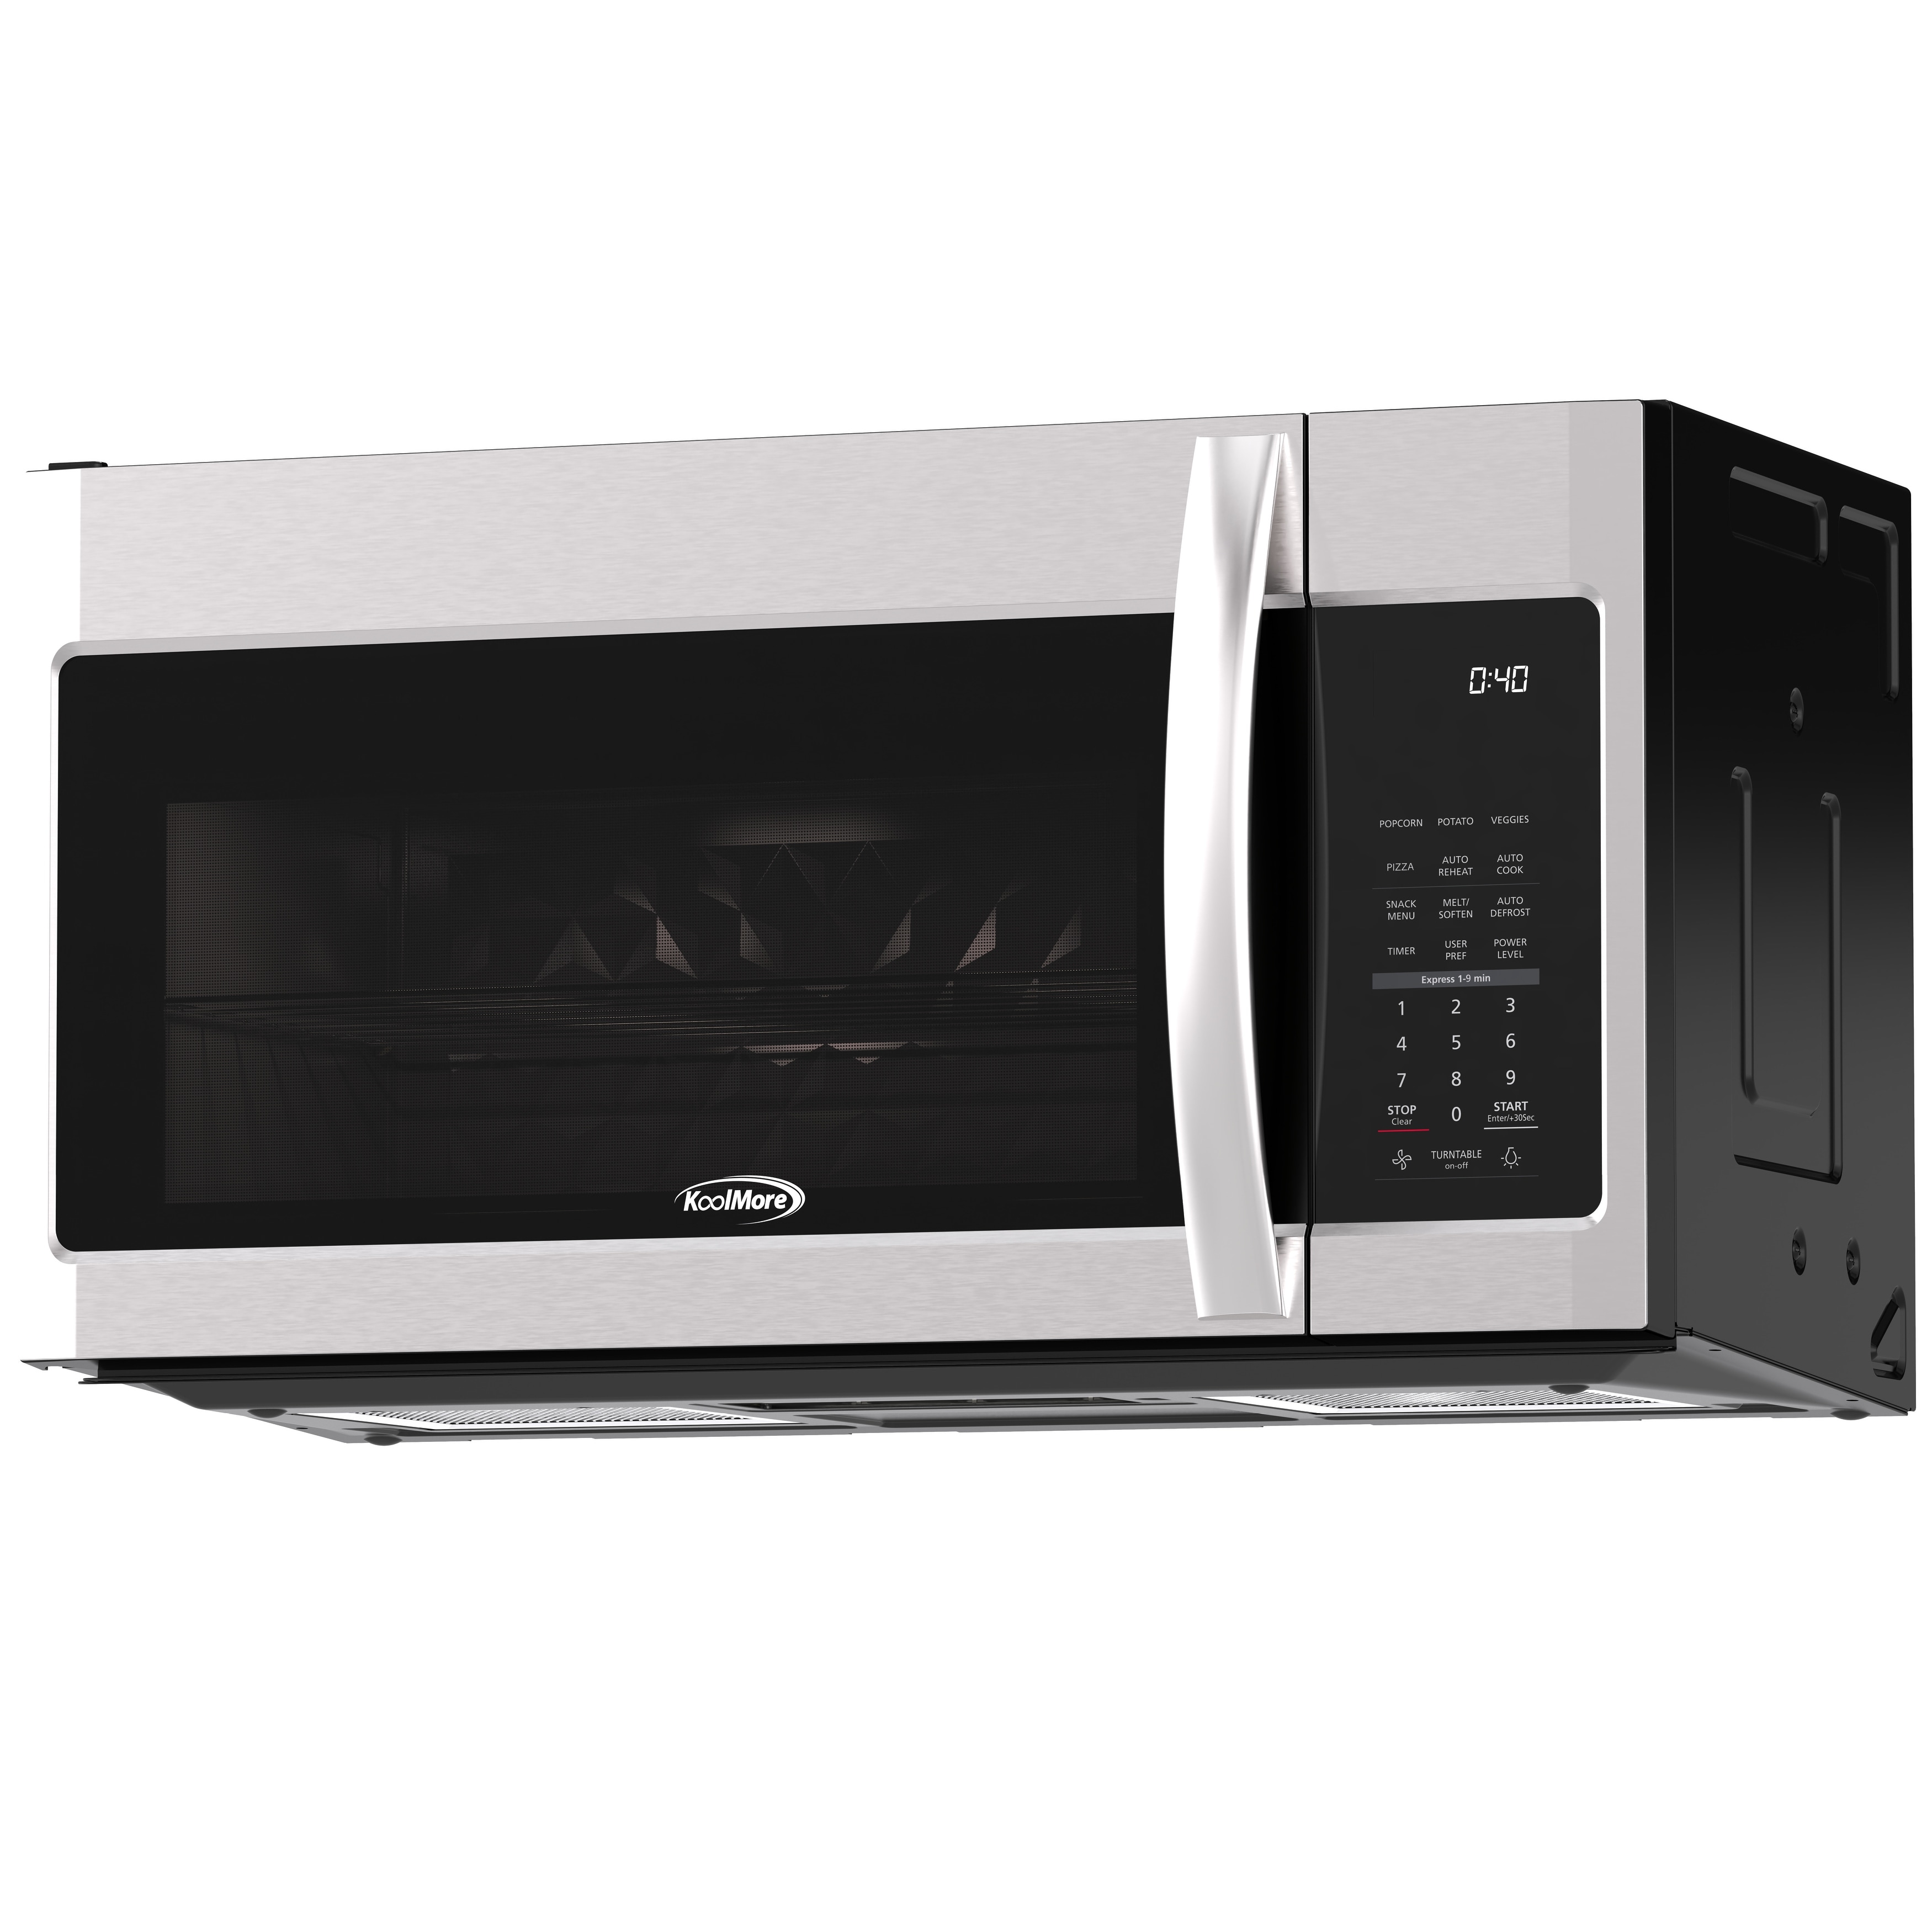 1.9 Cu. Ft. Over the Range Microwave Oven with Oven Lamp and 300CFM Recirculation Vent Hood Function - 1.9 cu ft